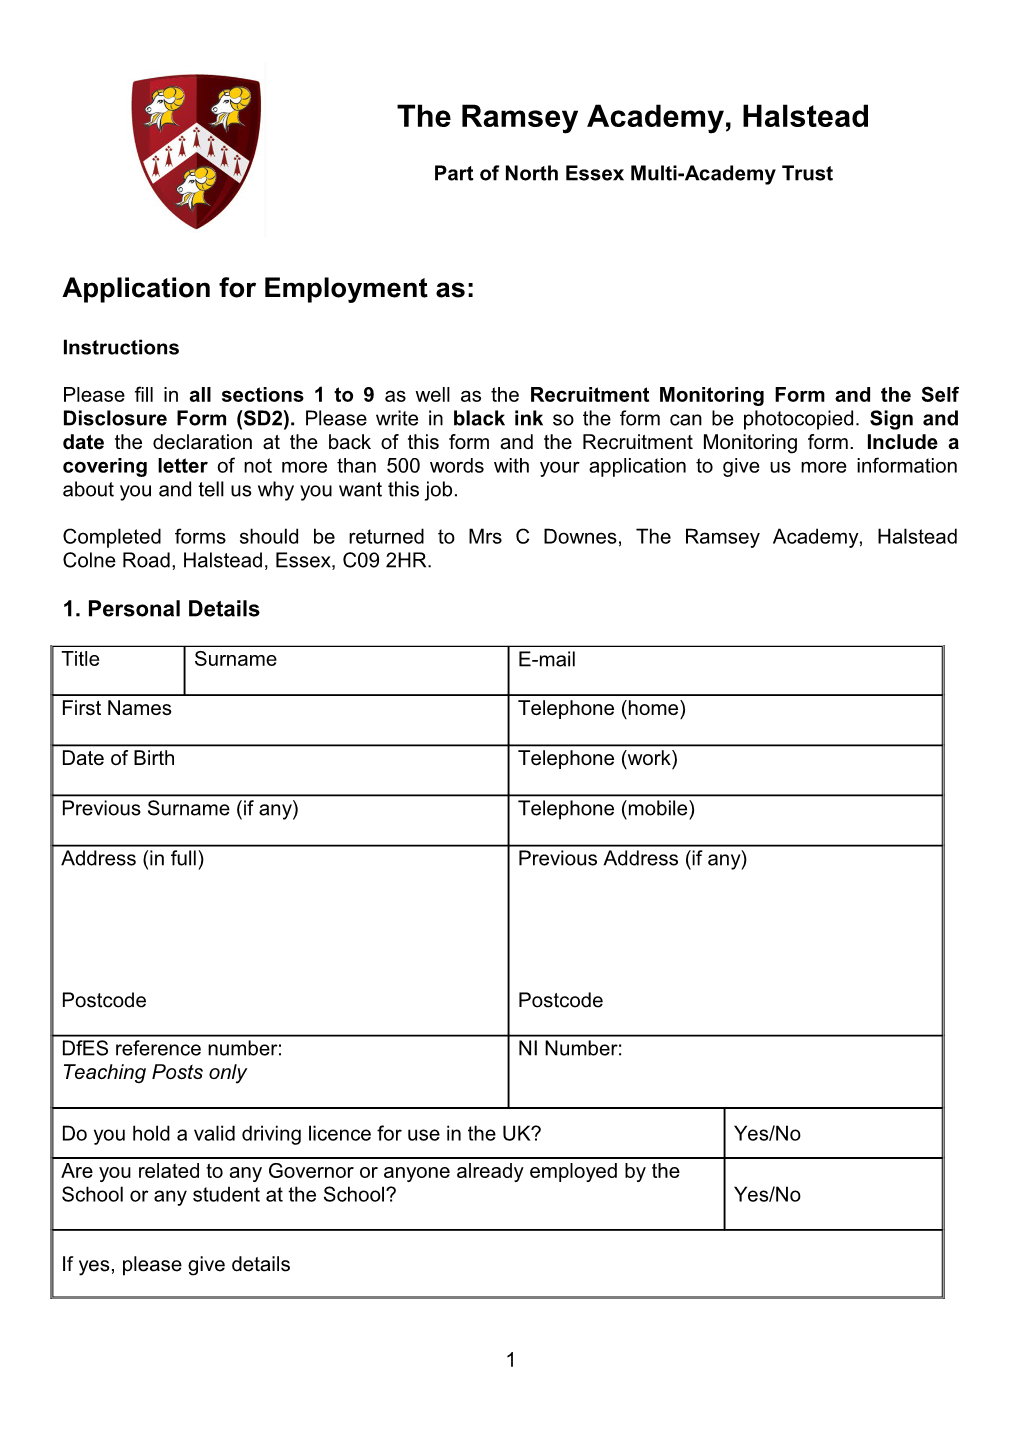 Application for Employment As